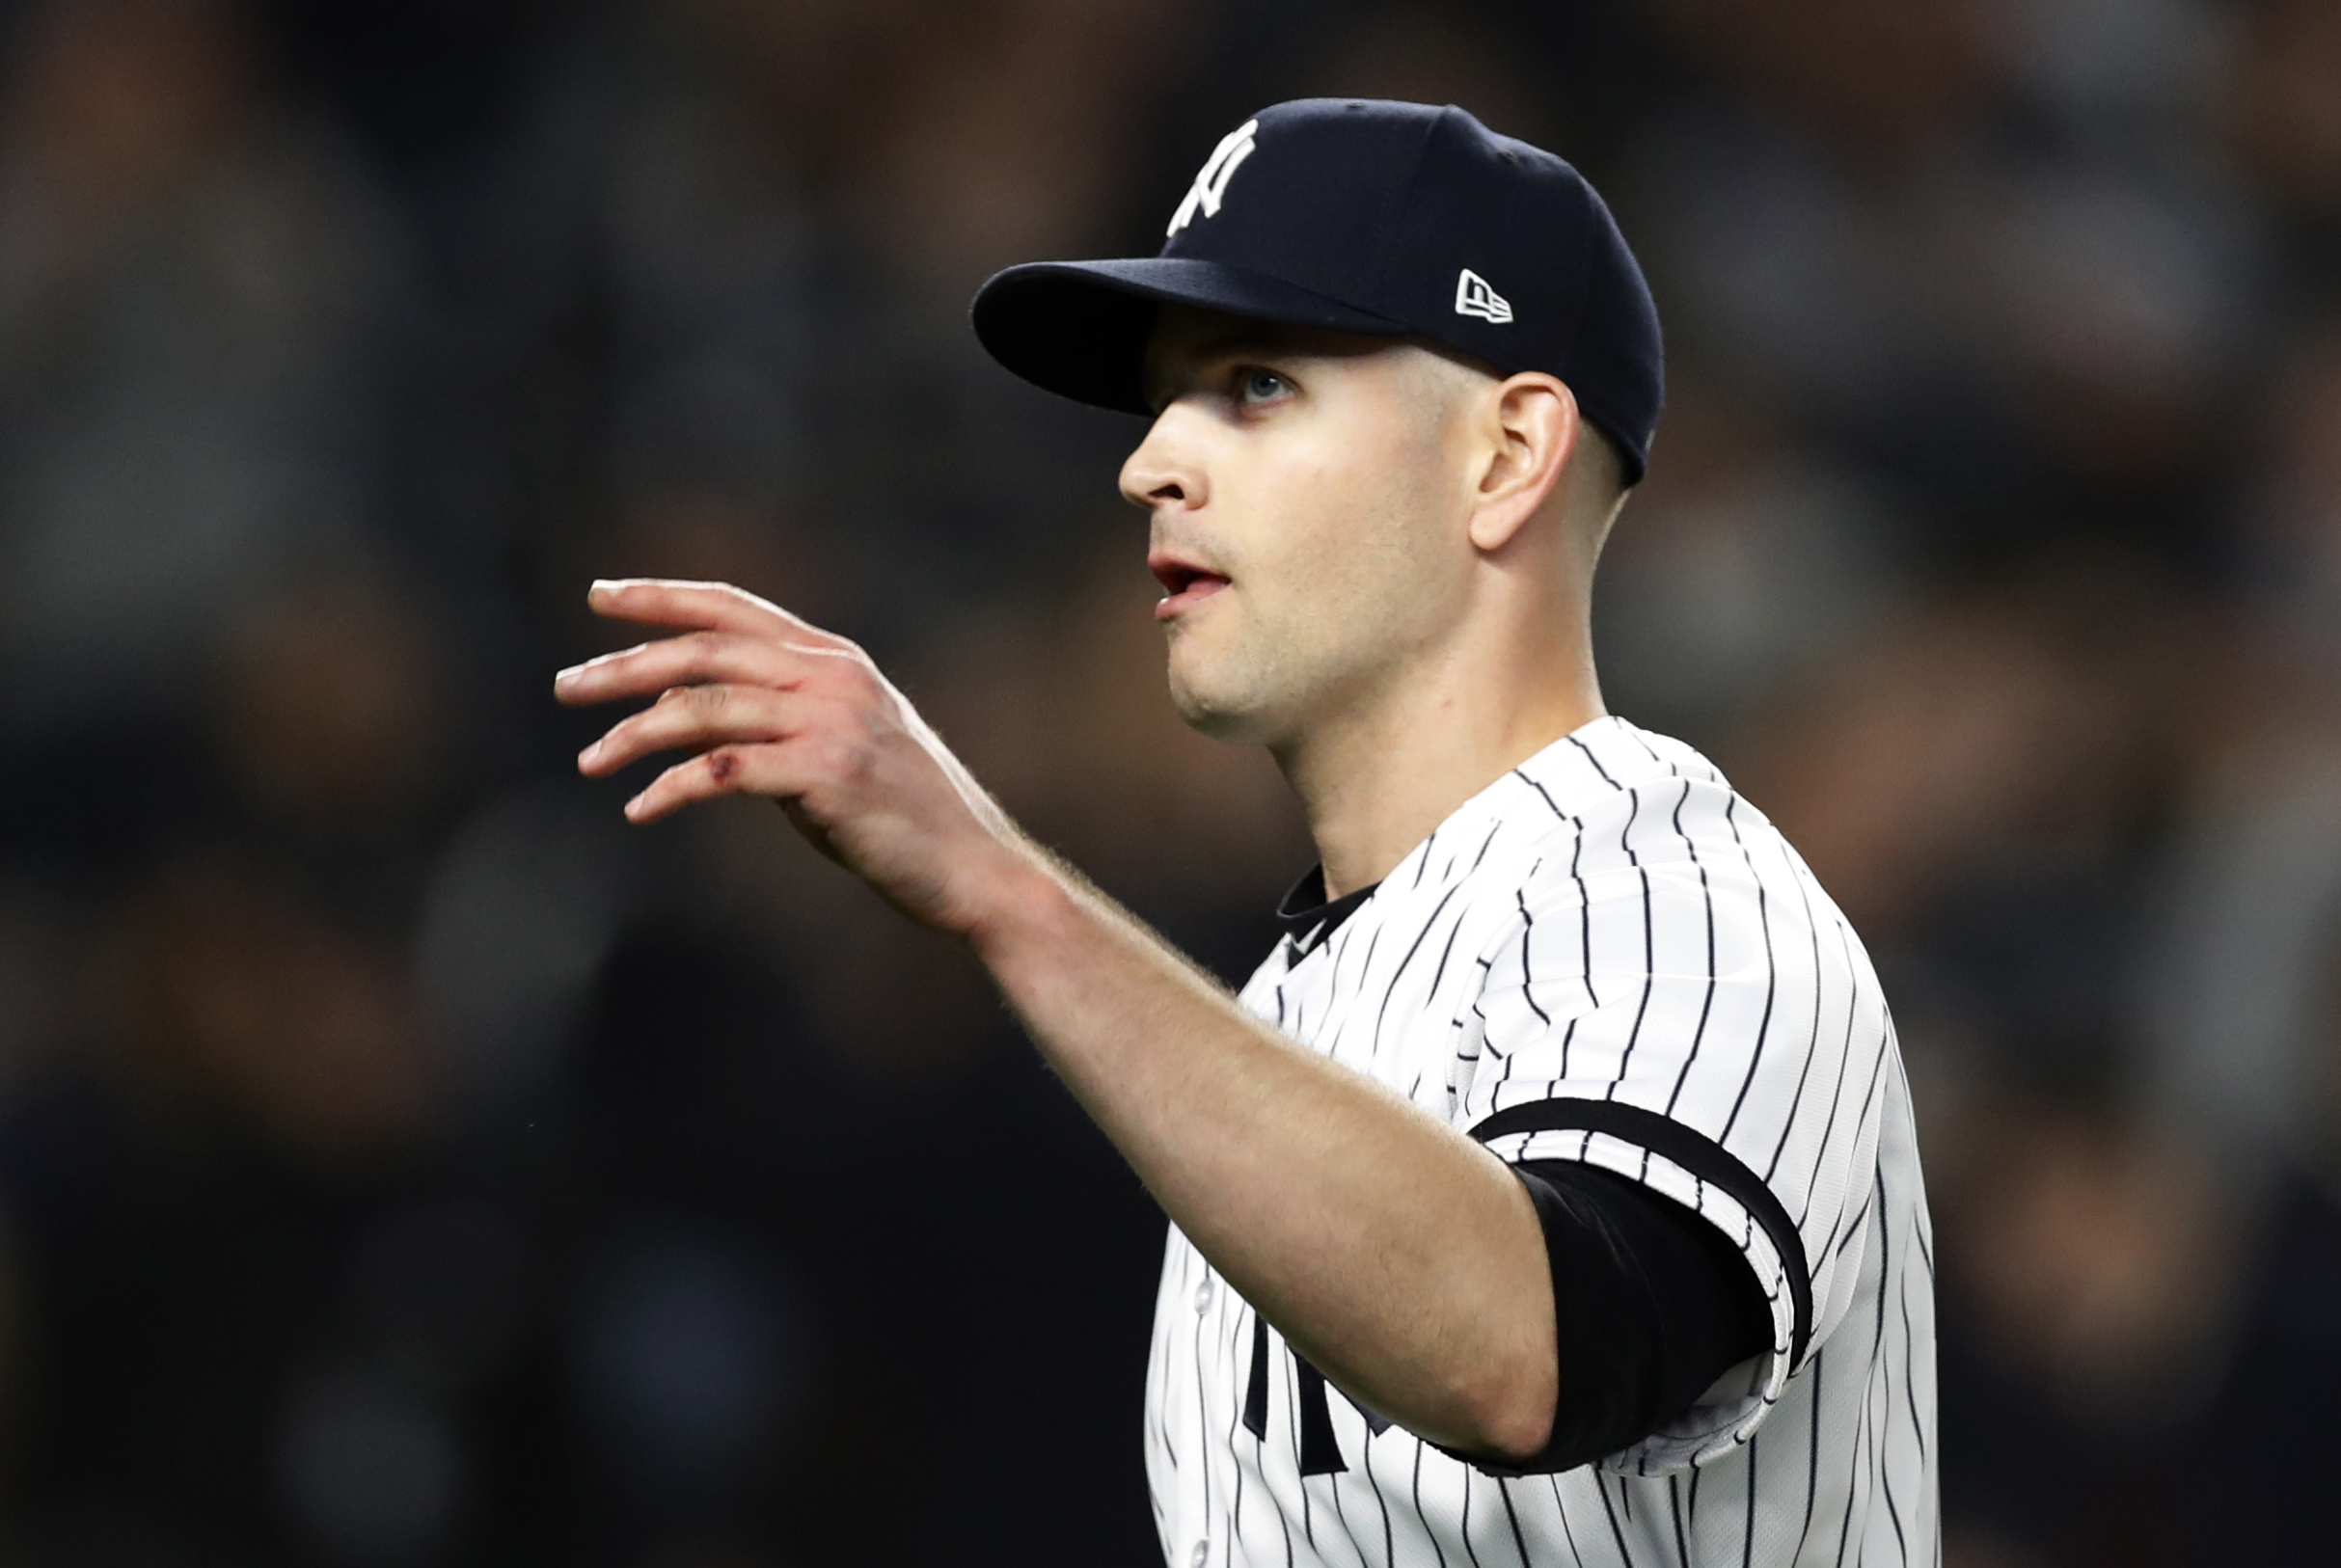 Yanks beat Red Sox 8-0 in matchup of struggling AL East foes